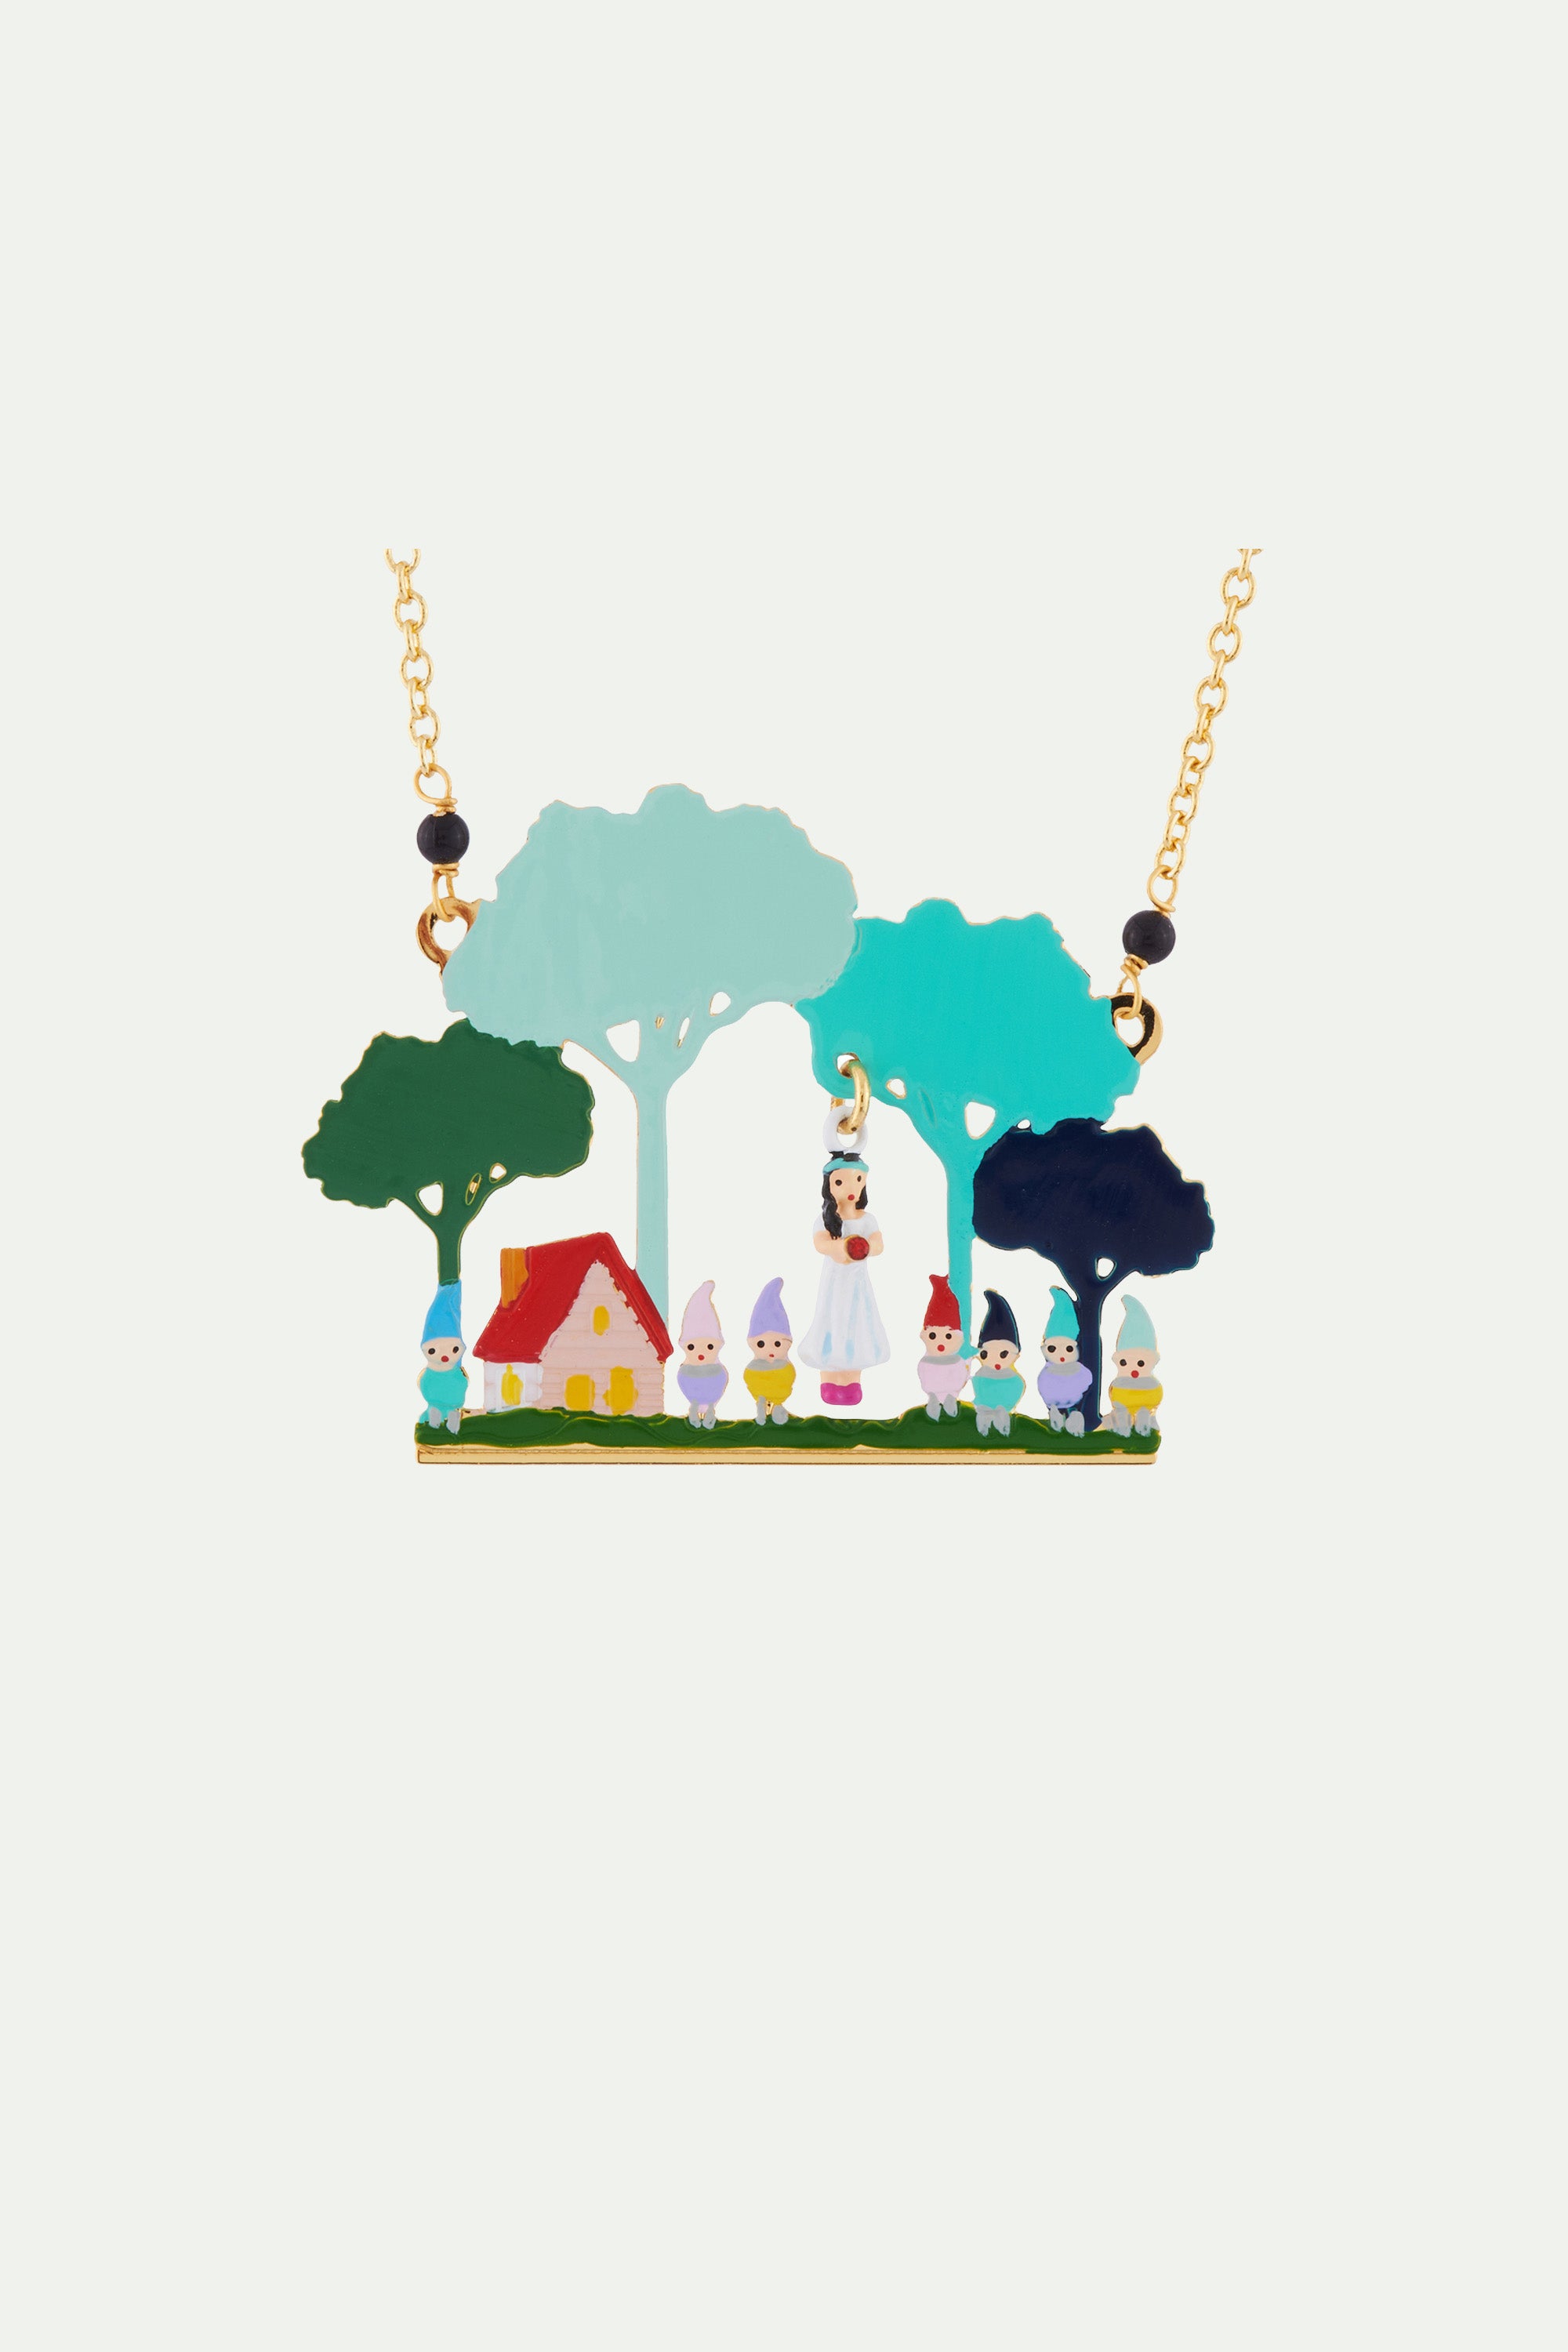 Snow White and the 7 dwarfs in front of their cottage necklace